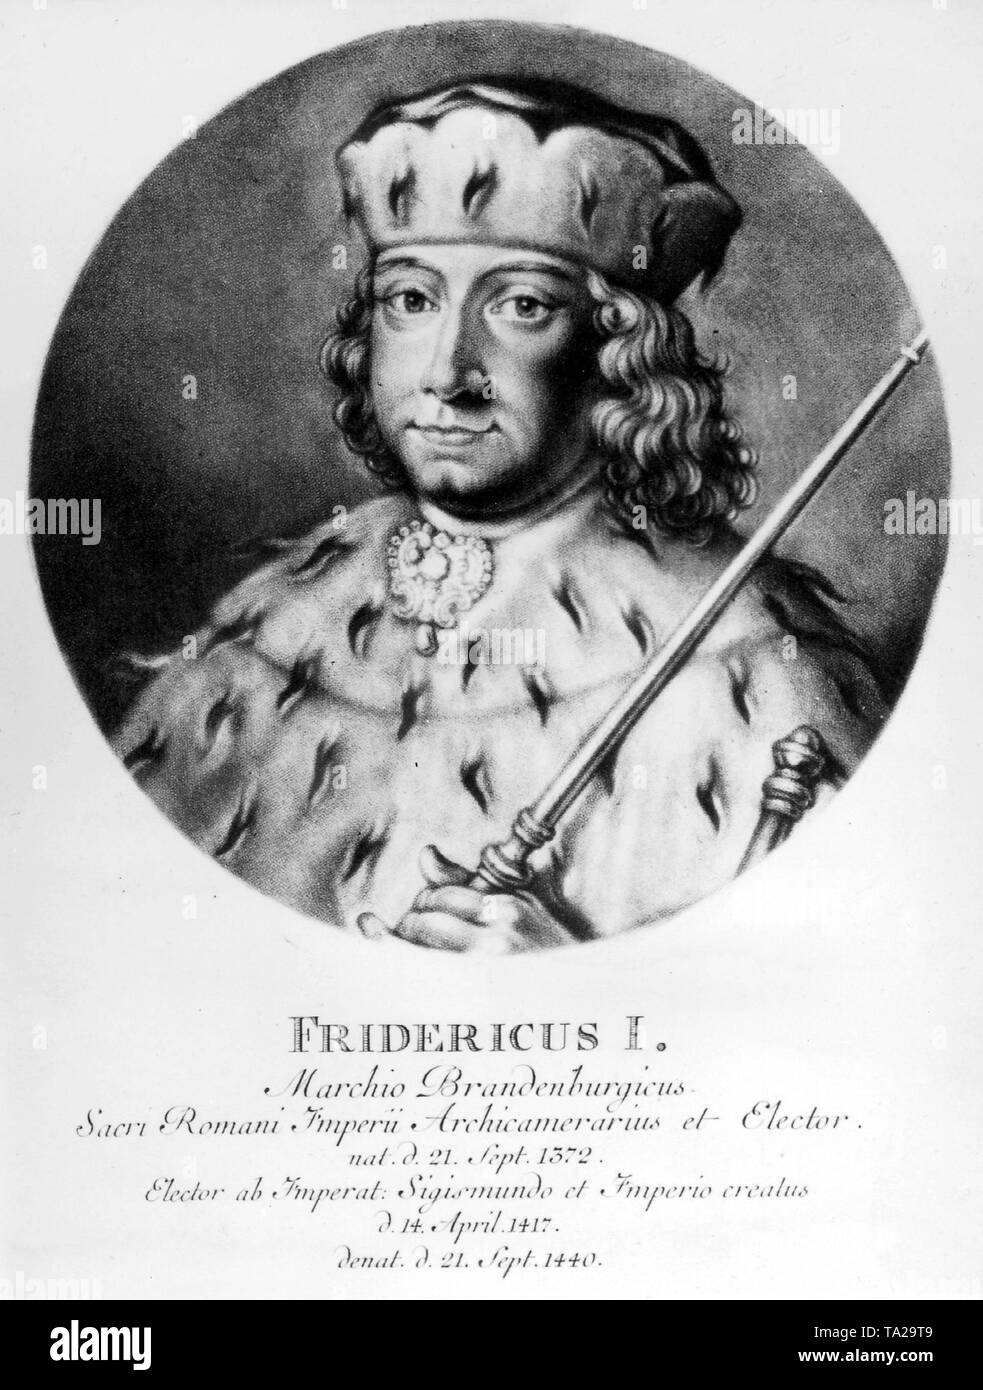 Frederick I (1372-1440), Margrave and Elector of Brandenburg and Burgrave of Nuremberg. He was the first member of the House of Hohenzollern who was awarded in 1417 with the Margraviate of Brandenburg by Emperor Sigismund. Stock Photo